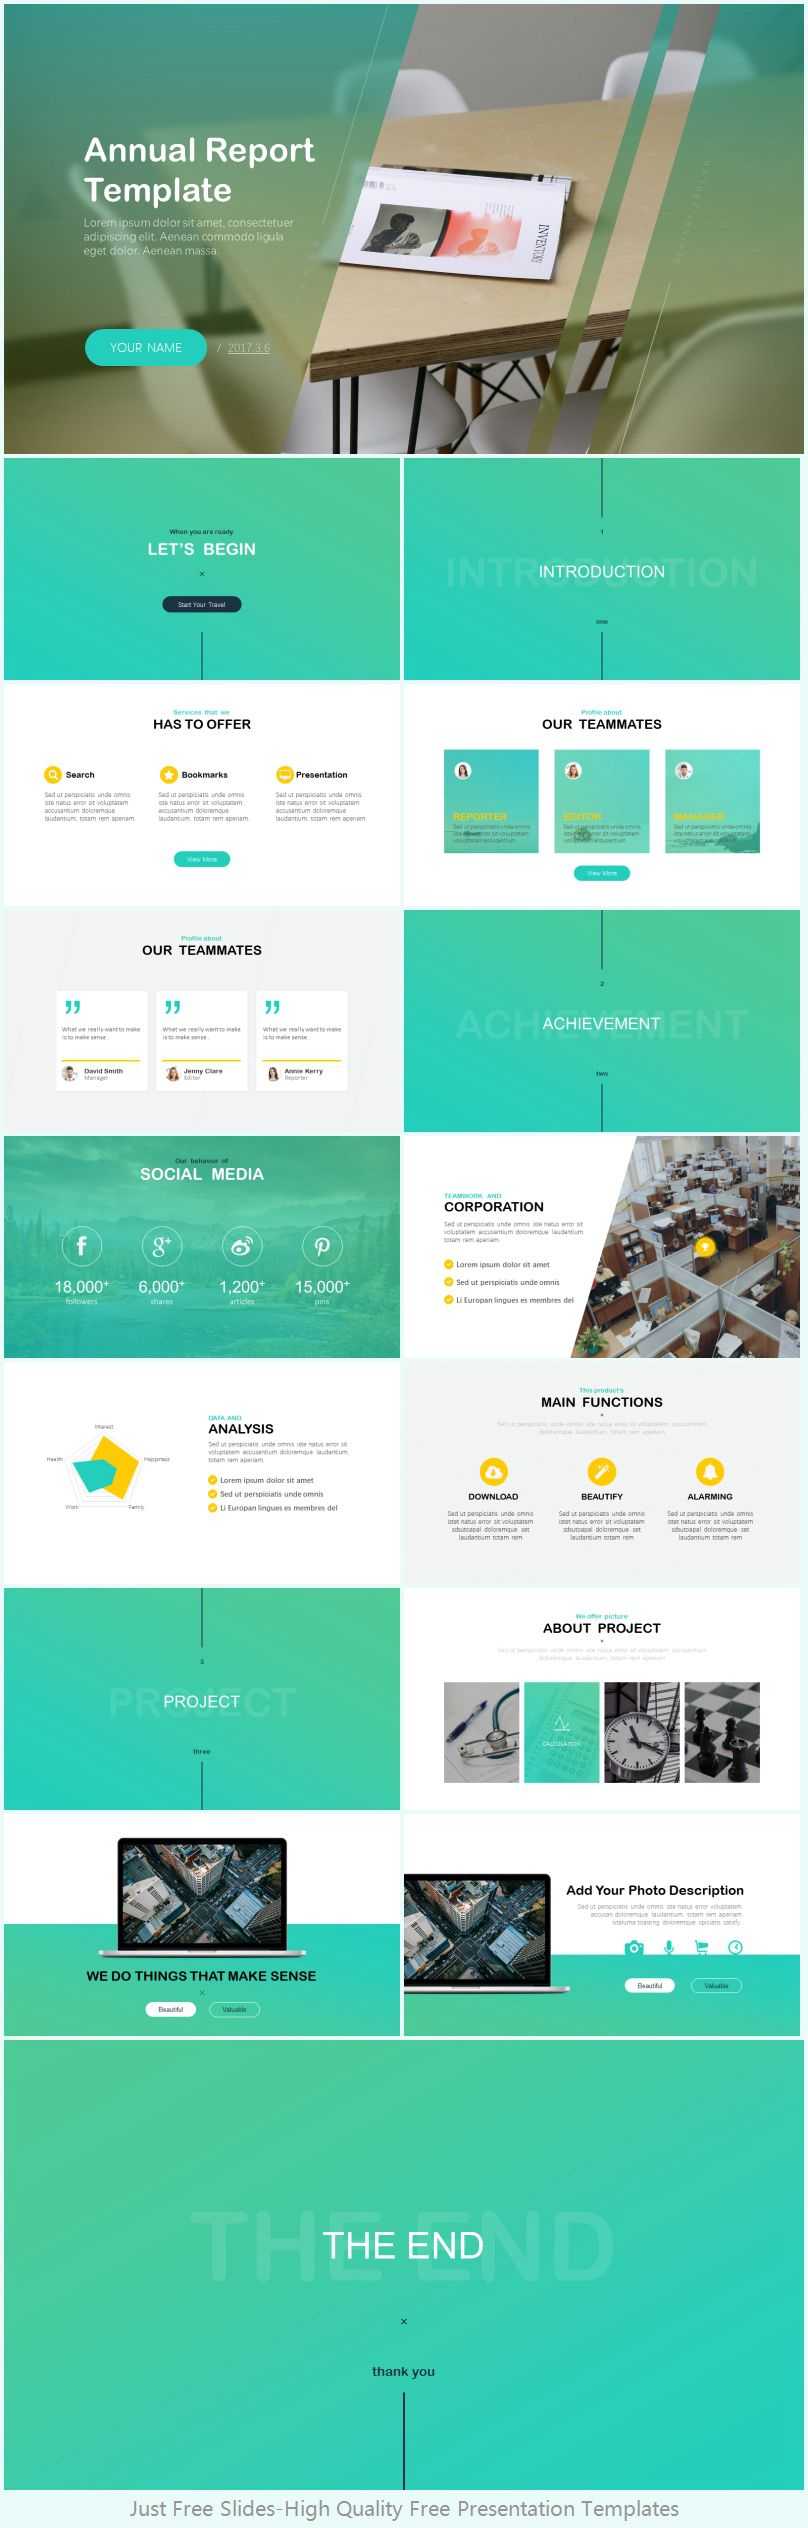 Annual Report Powerpoint Template – Just Free Slides Inside Summary Annual Report Template